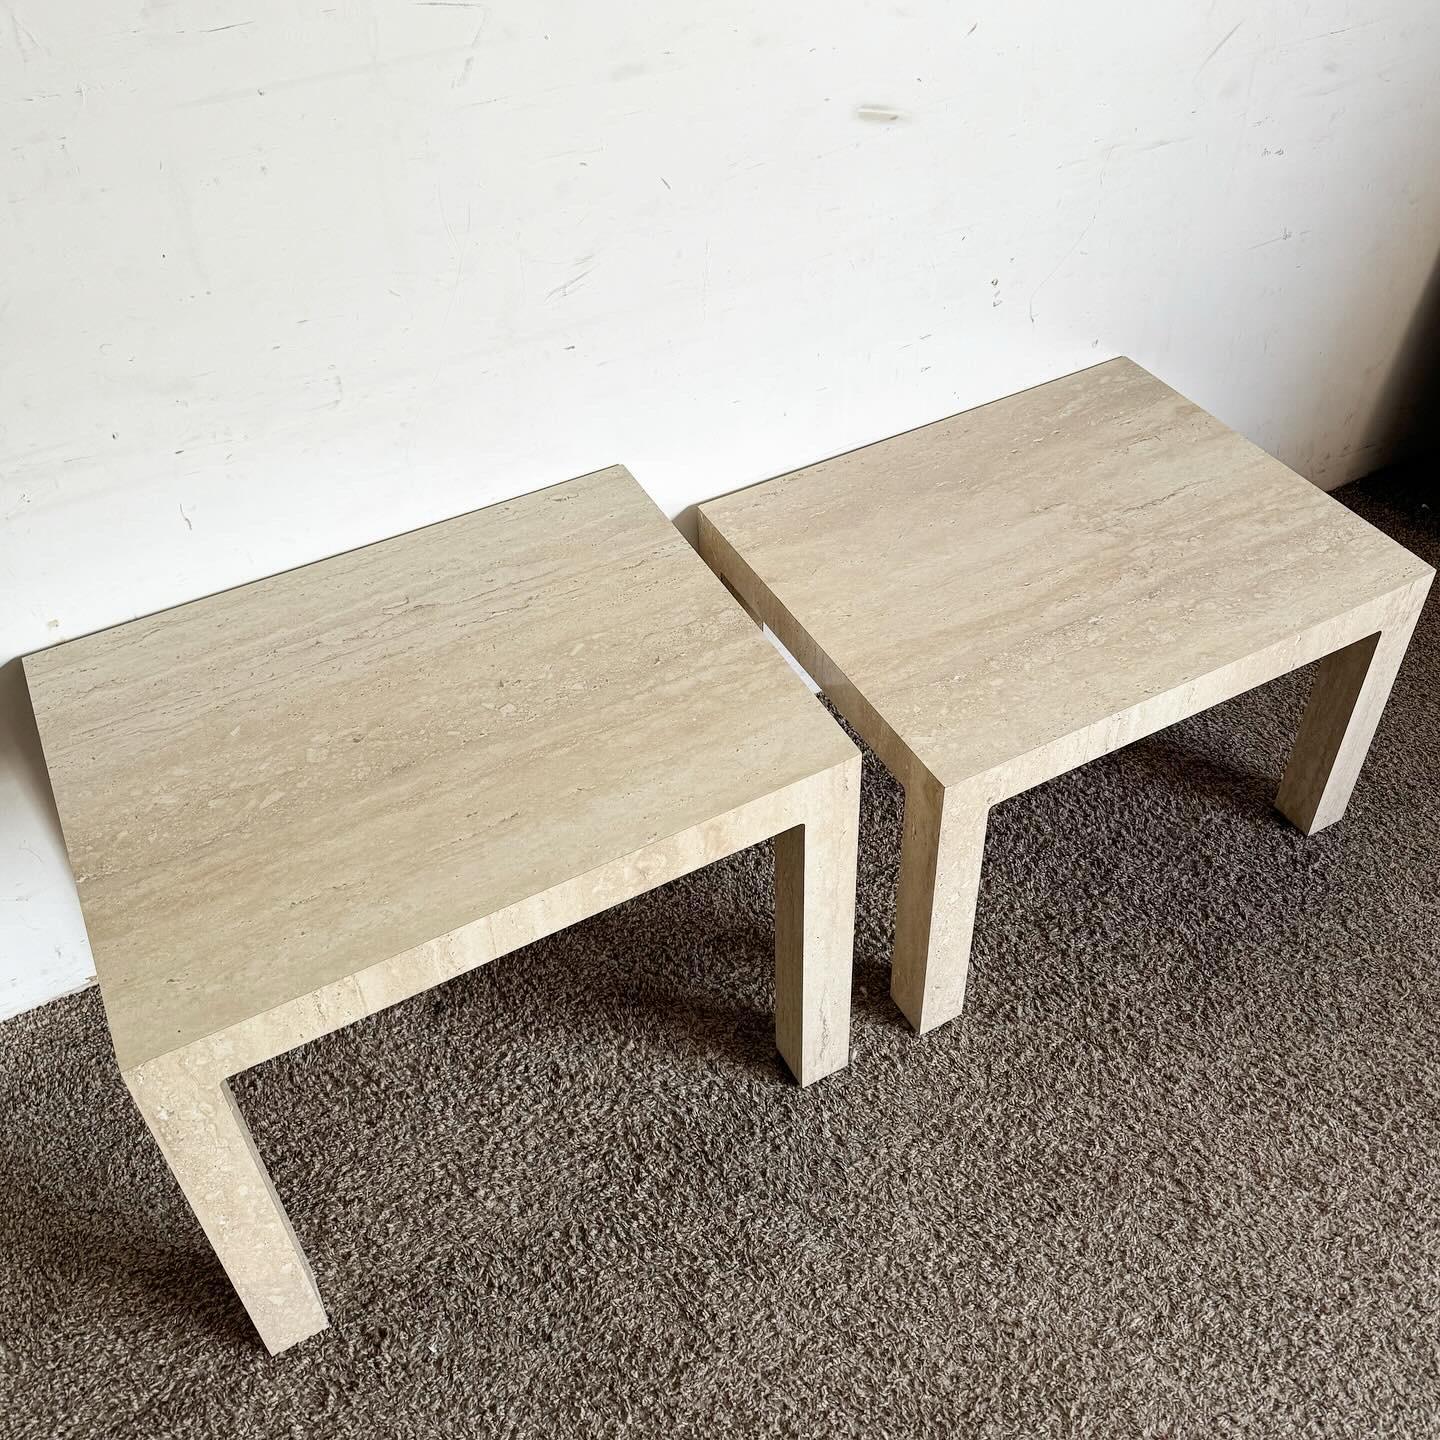 American Postmodern Faux Travertine Laminate Parsons Side Tables - a Pair For Sale